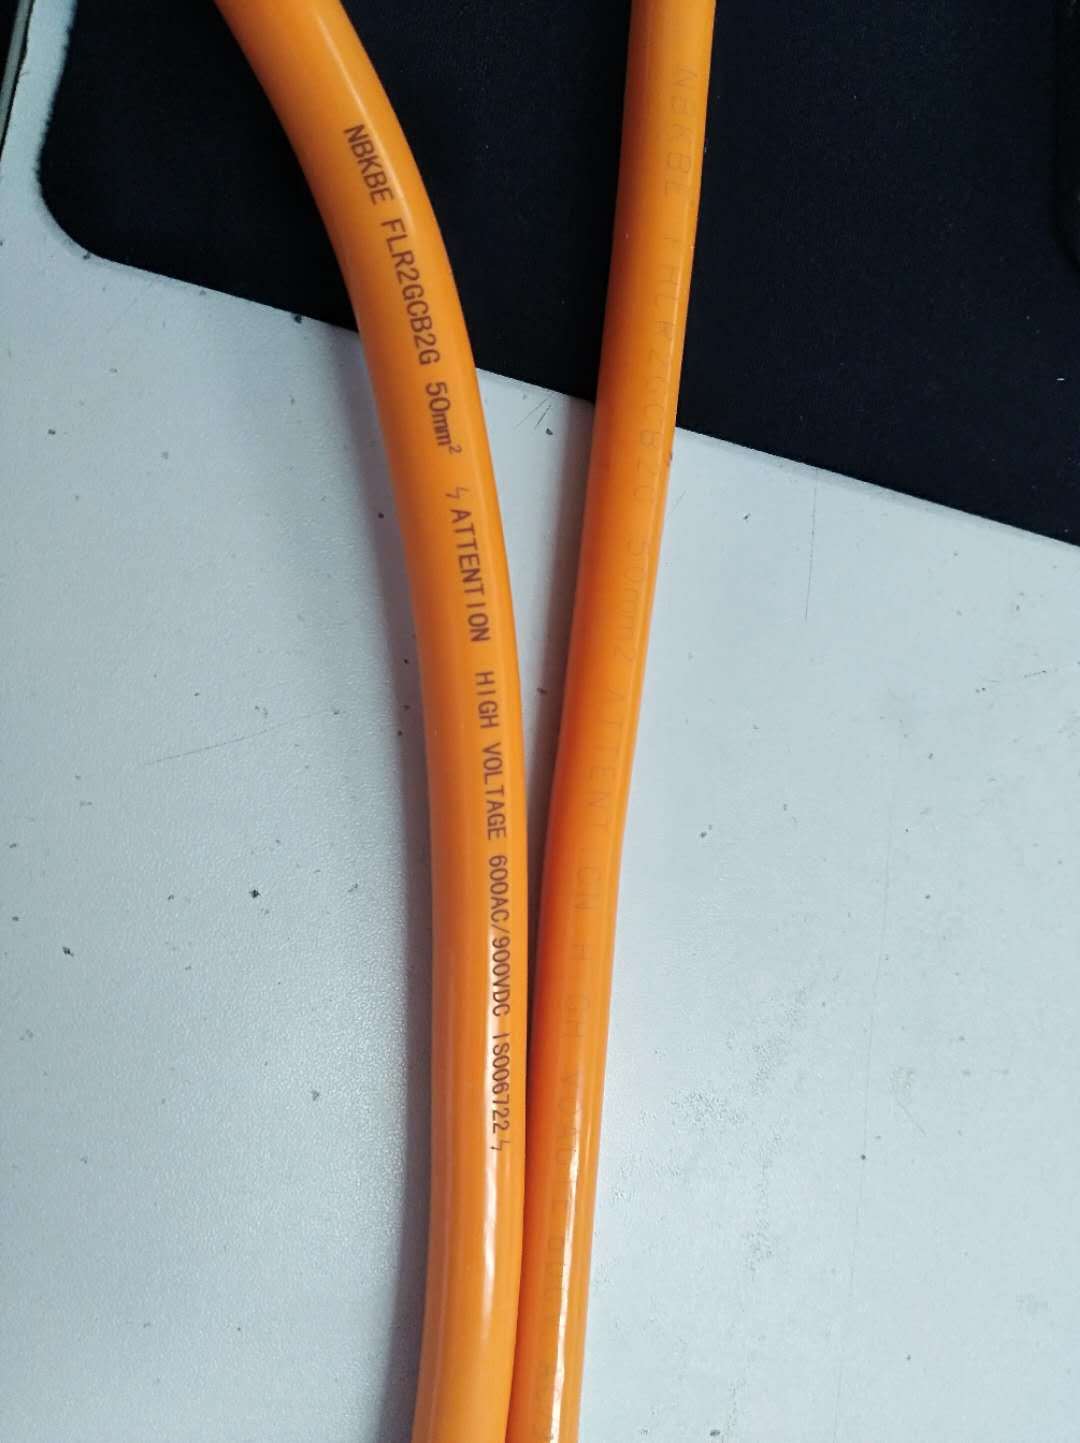 UV laser mark on cable